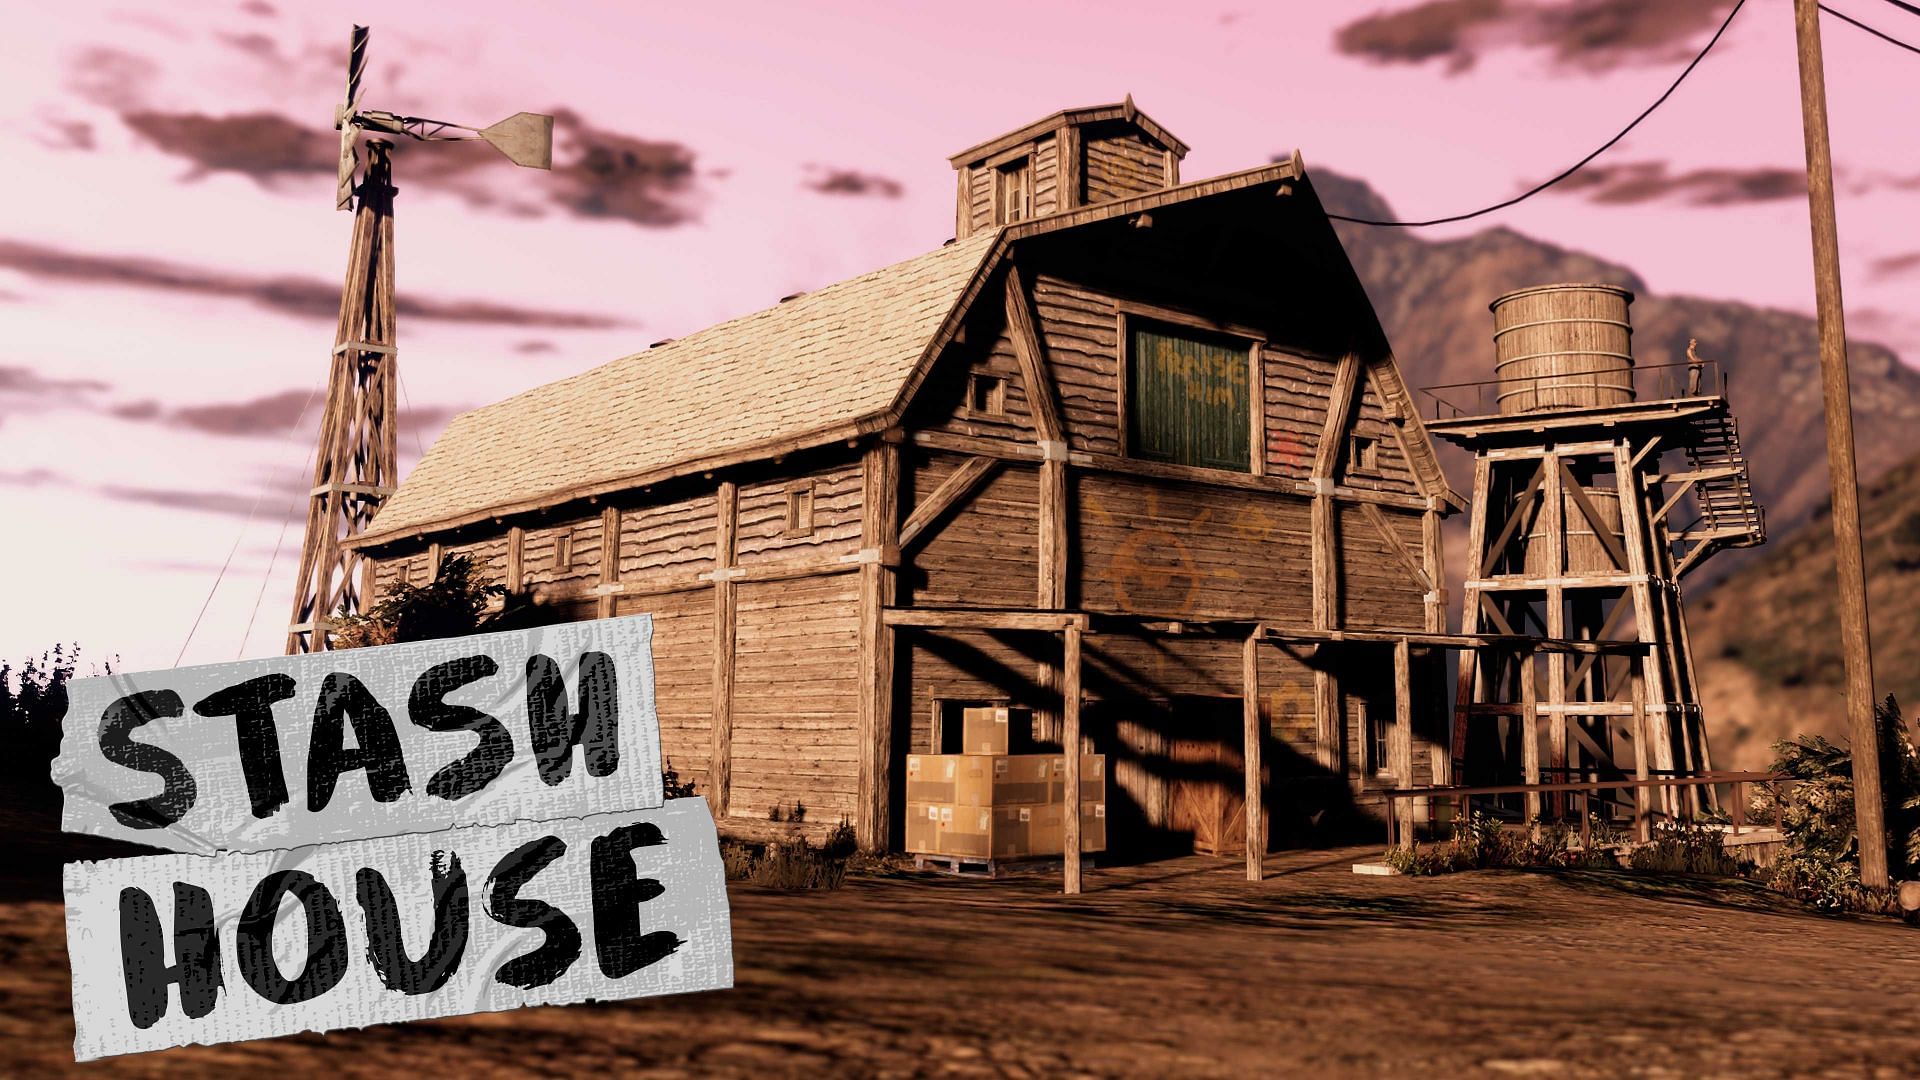 A promotional image featuring a Stash House (Image via Rockstar Games)